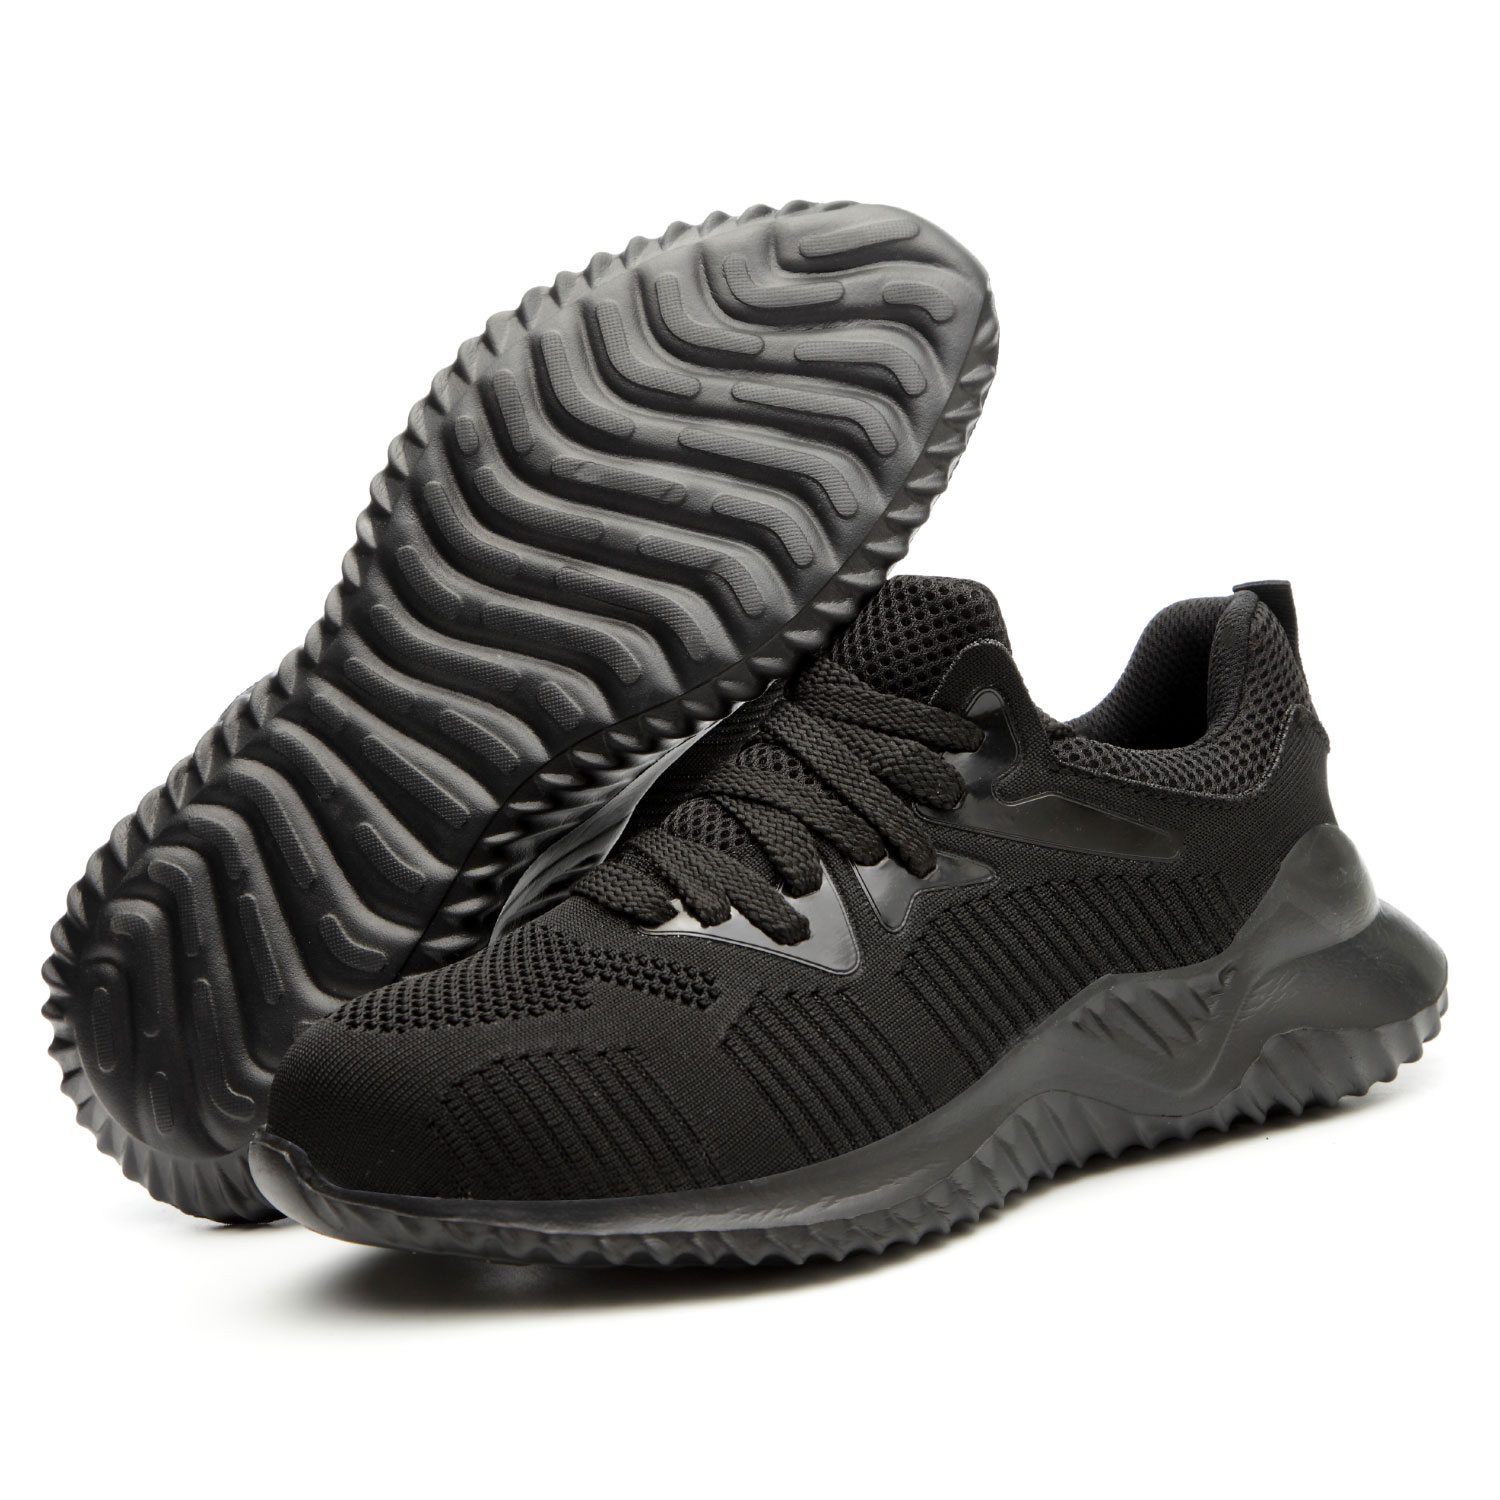 Anti-Smashing Protective Safety Sneakers-